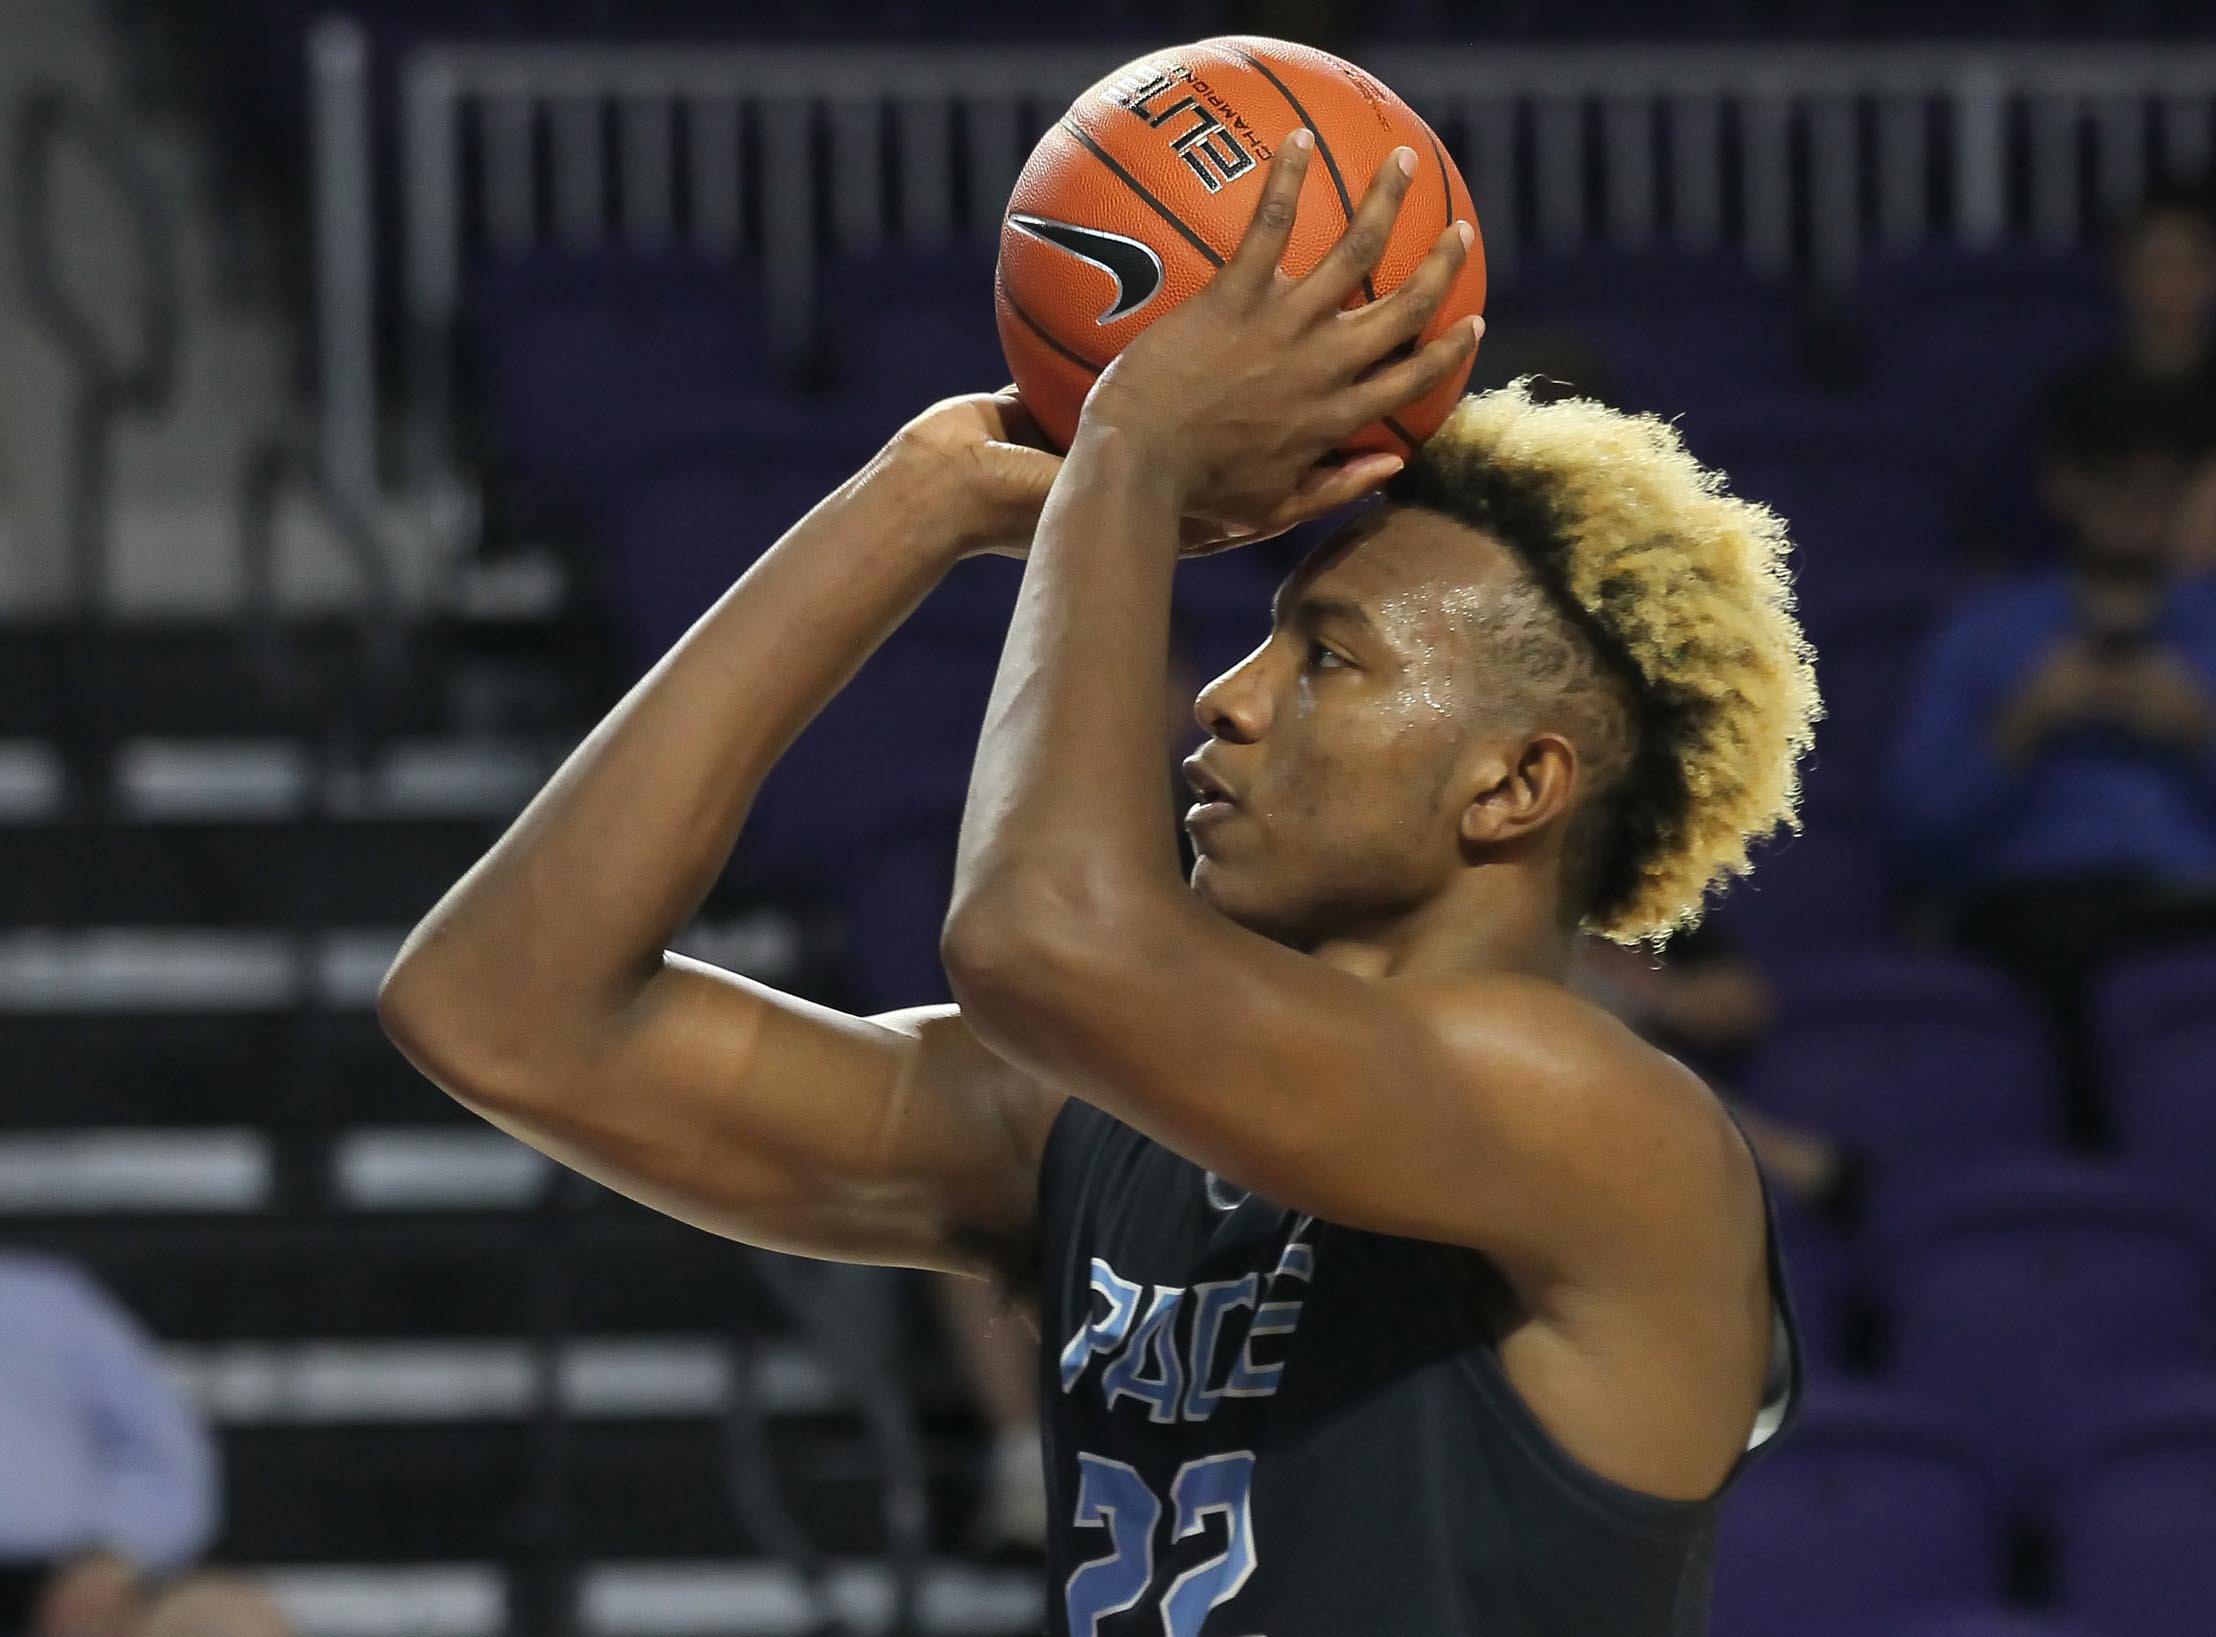 Wendell Carter Jr. has made quite an impression at Duke.